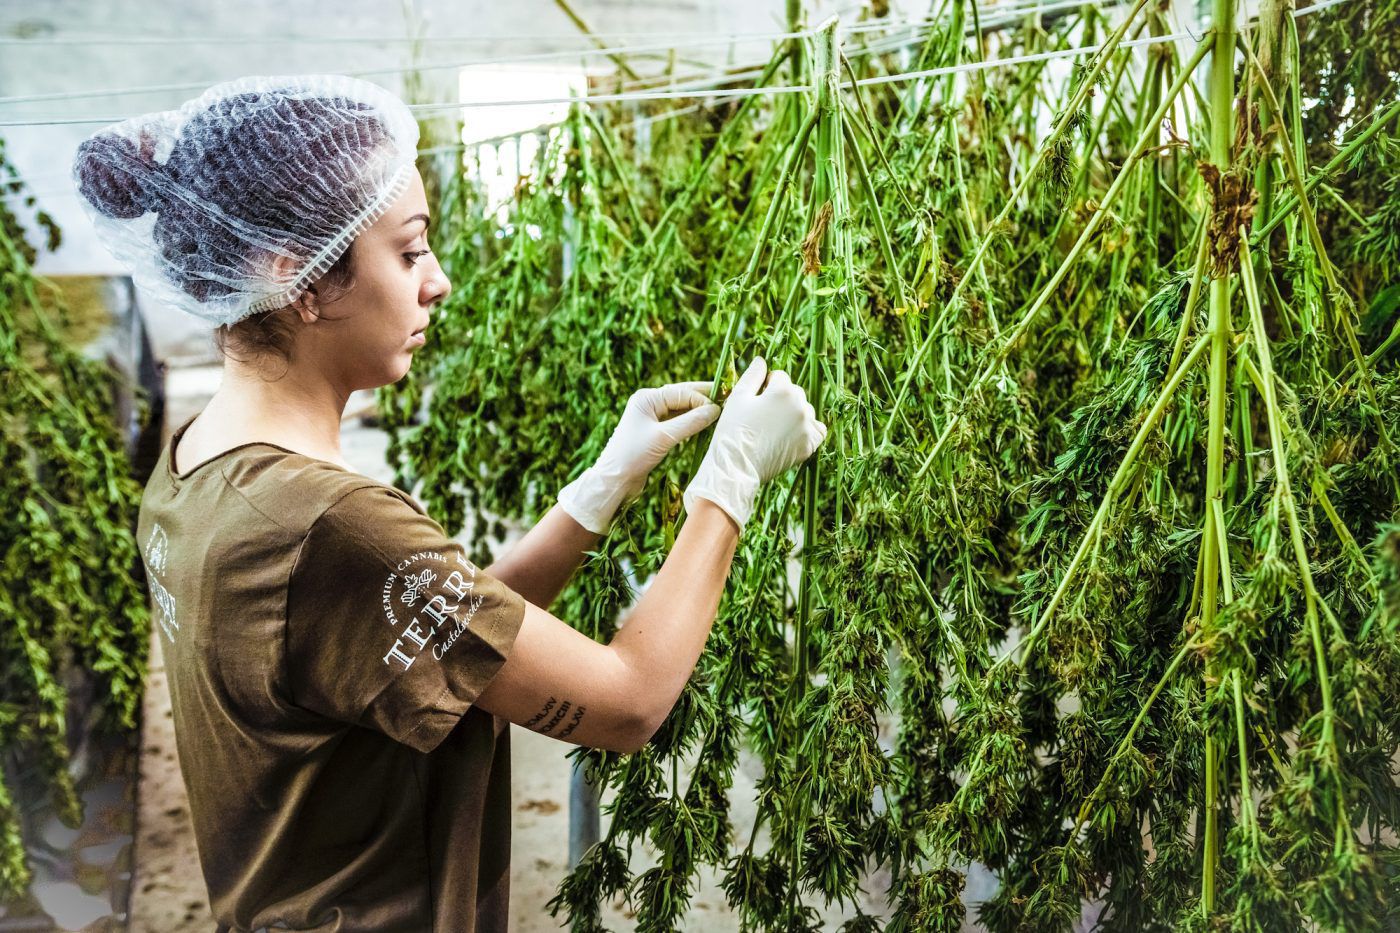 Find Jobs Within the Cannabis Industry on Vangst